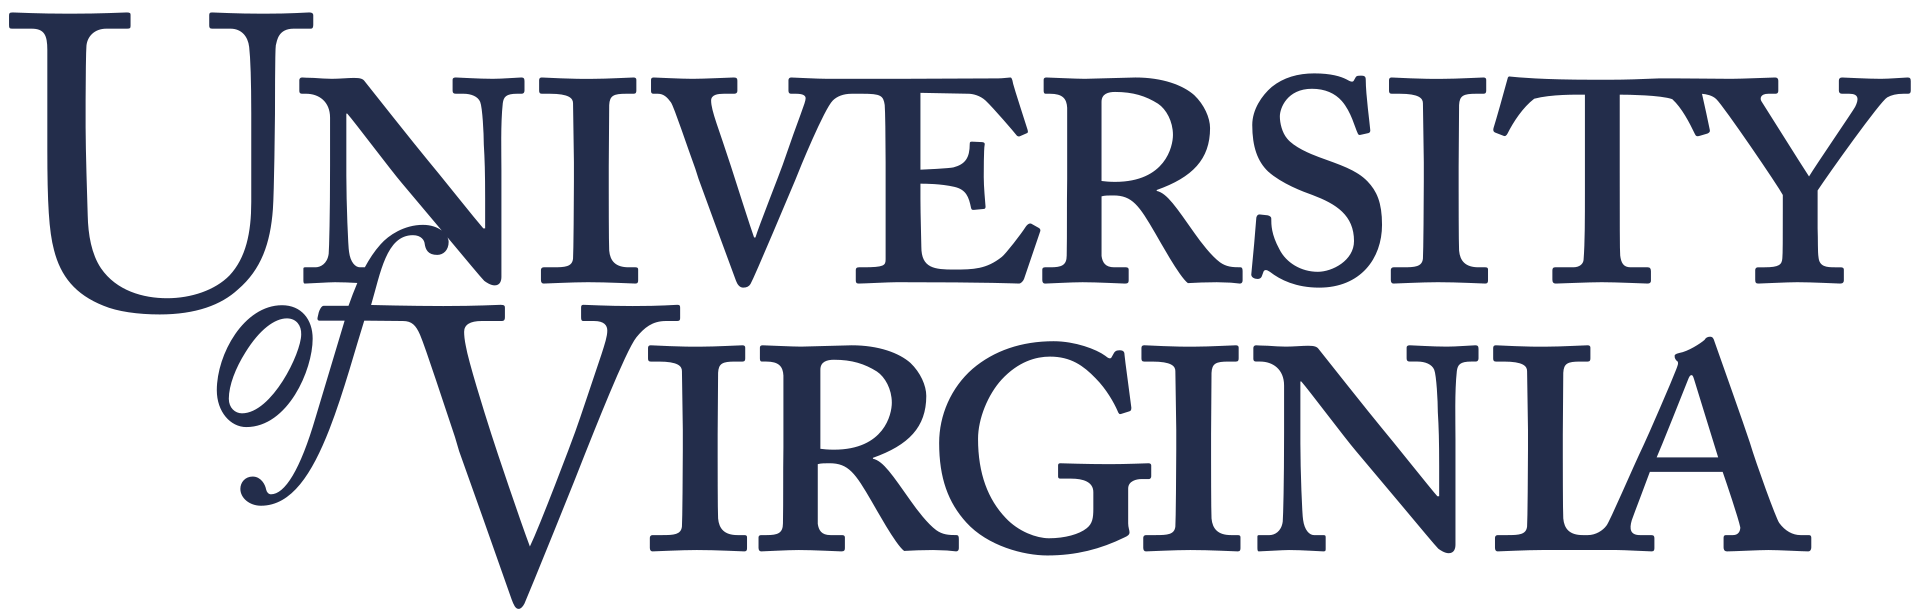 University of Virginia logo, By University of Virginia - Can be obtained from U.Va., 公共领域, http://commons.维基.org/w/index.php?curid = 18657033 "